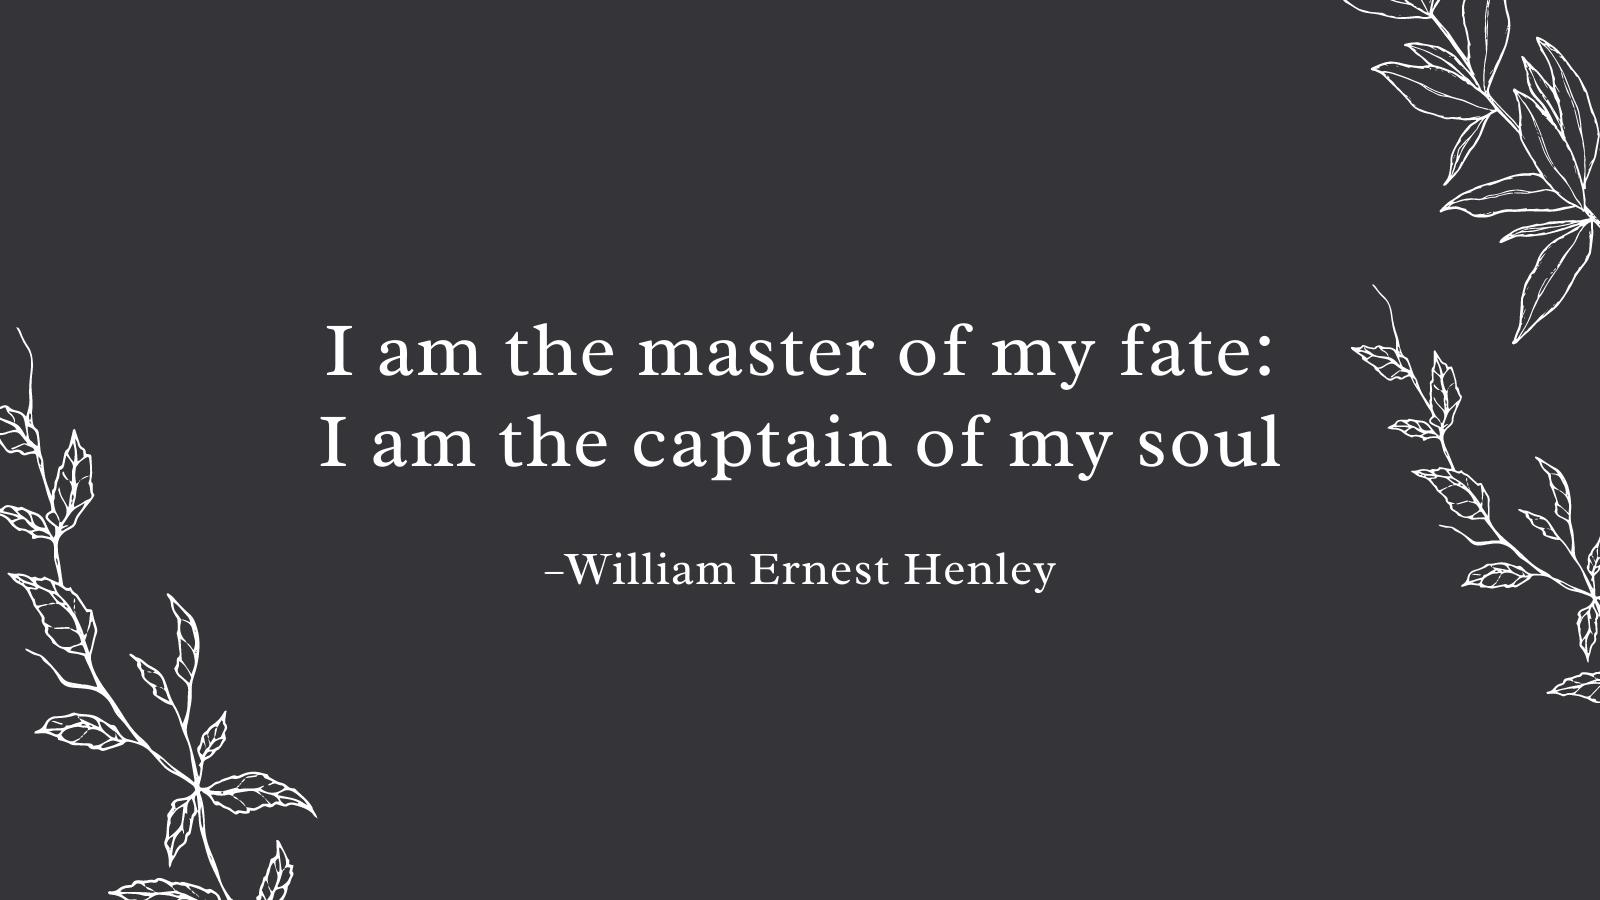 I am the master of my fate: I am the captain of my soul.